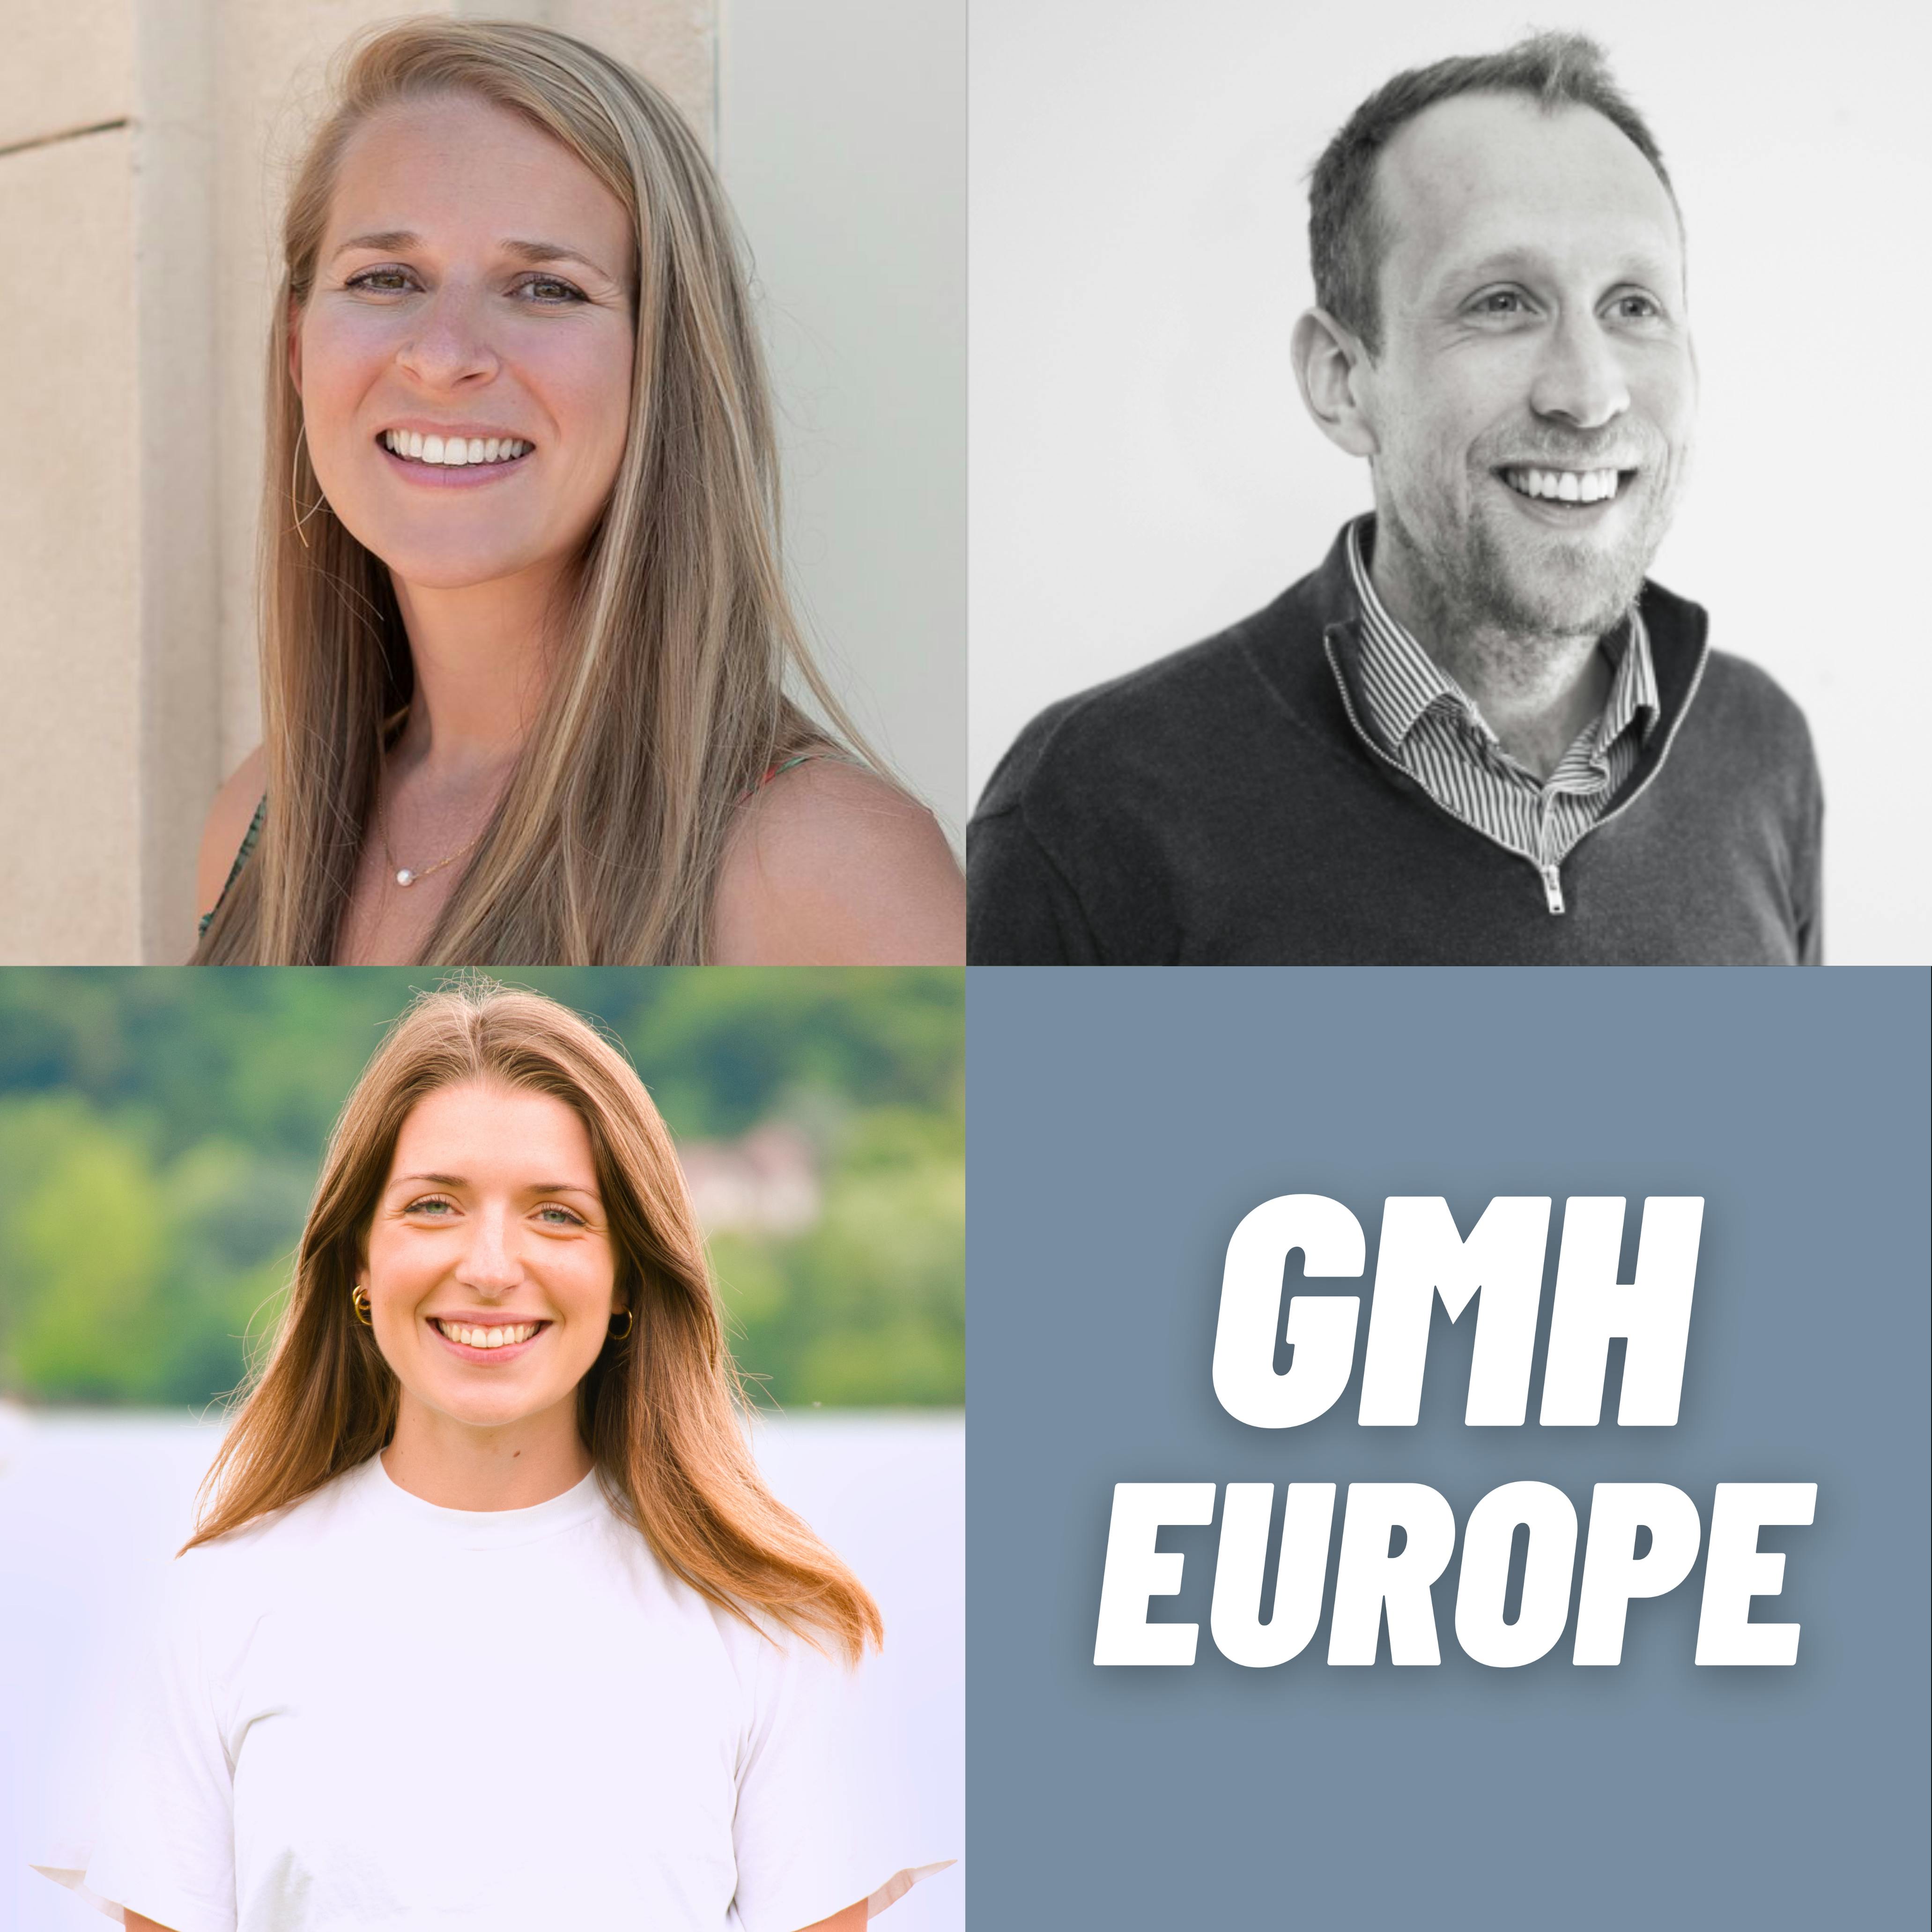 GMH Europe: TripAdvisor Removes 2M Reviews, Scaling Locally, & Booking.com Removes Sustainability Badge